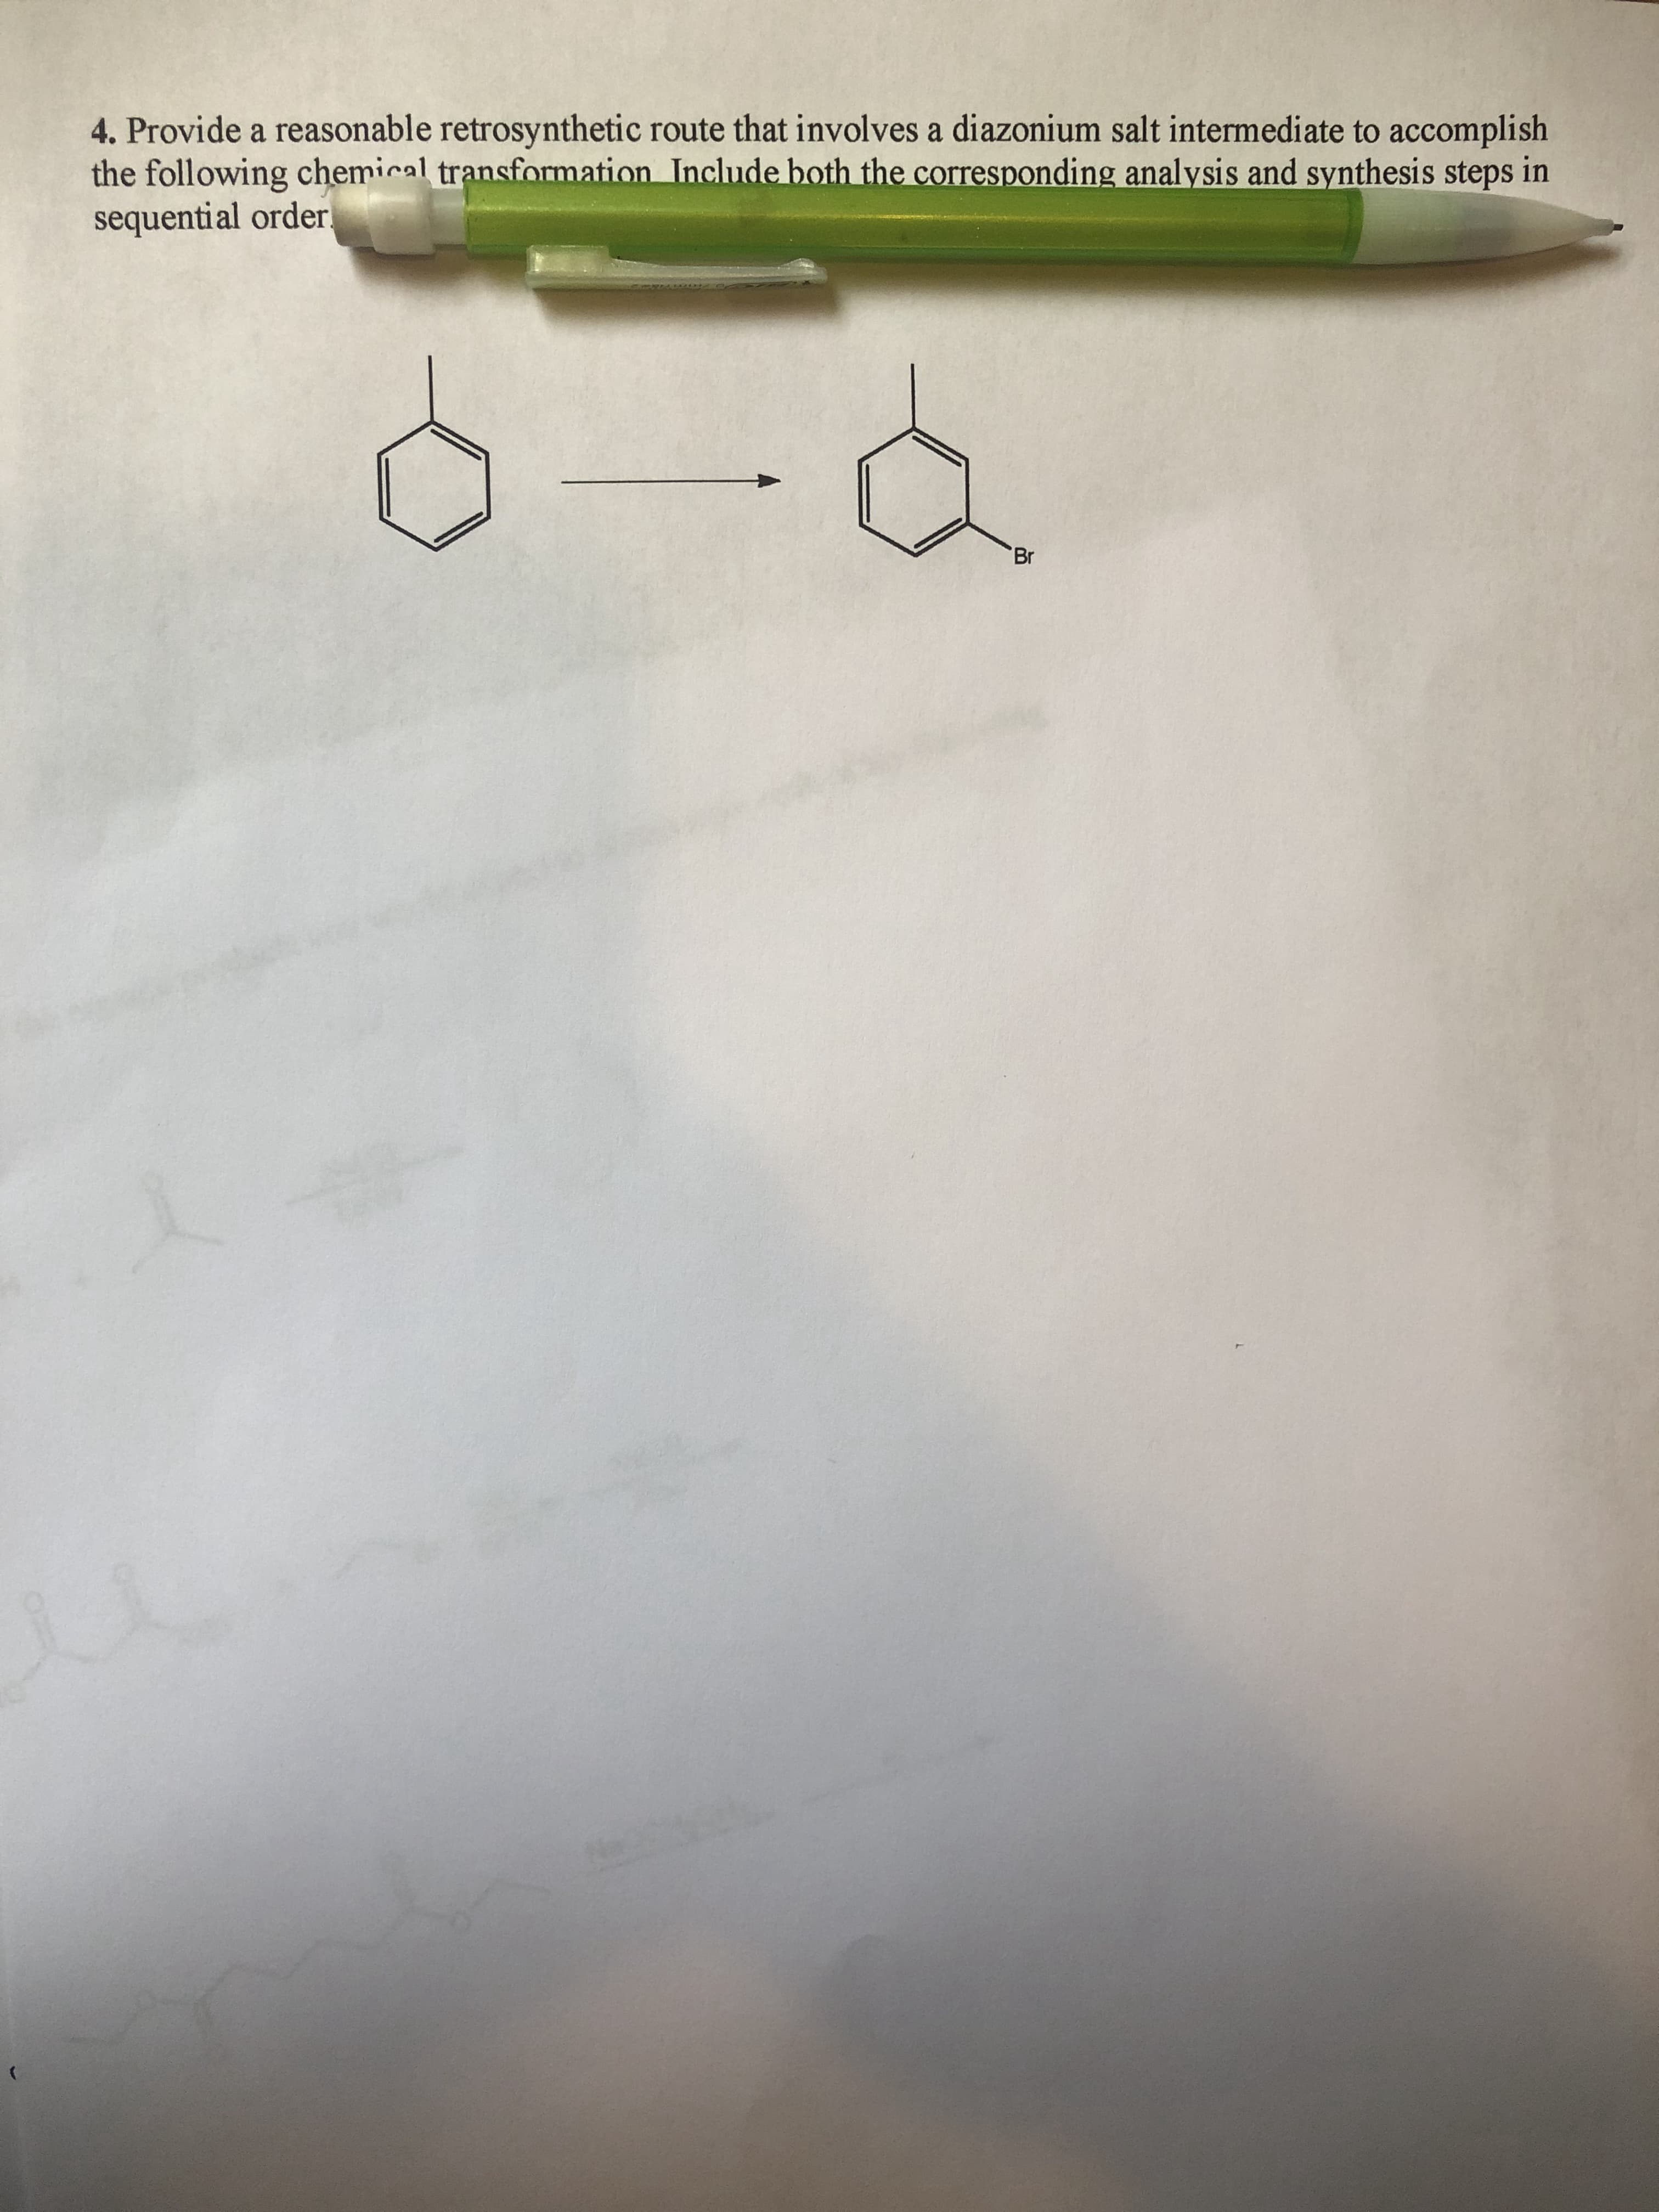 4. Provide a reasonable retrosynthetic route that involves a diazonium salt intermediate to accomplish
the following chemical transformation Include both the corresponding analysis and synthesis steps in
sequential order
Br
